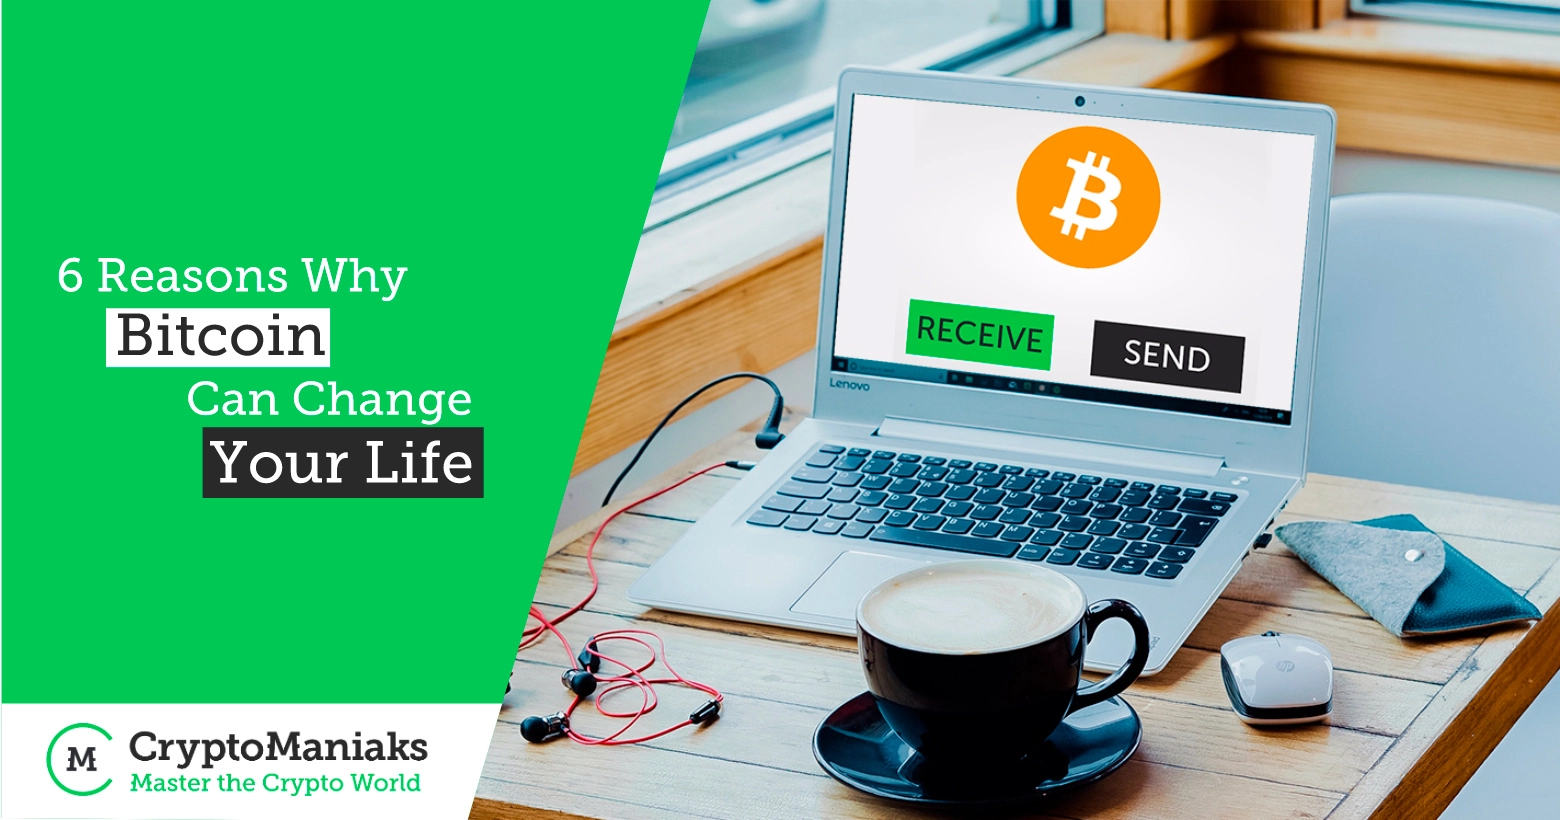 6 Reasons Why Bitcoin Can Change Your Life